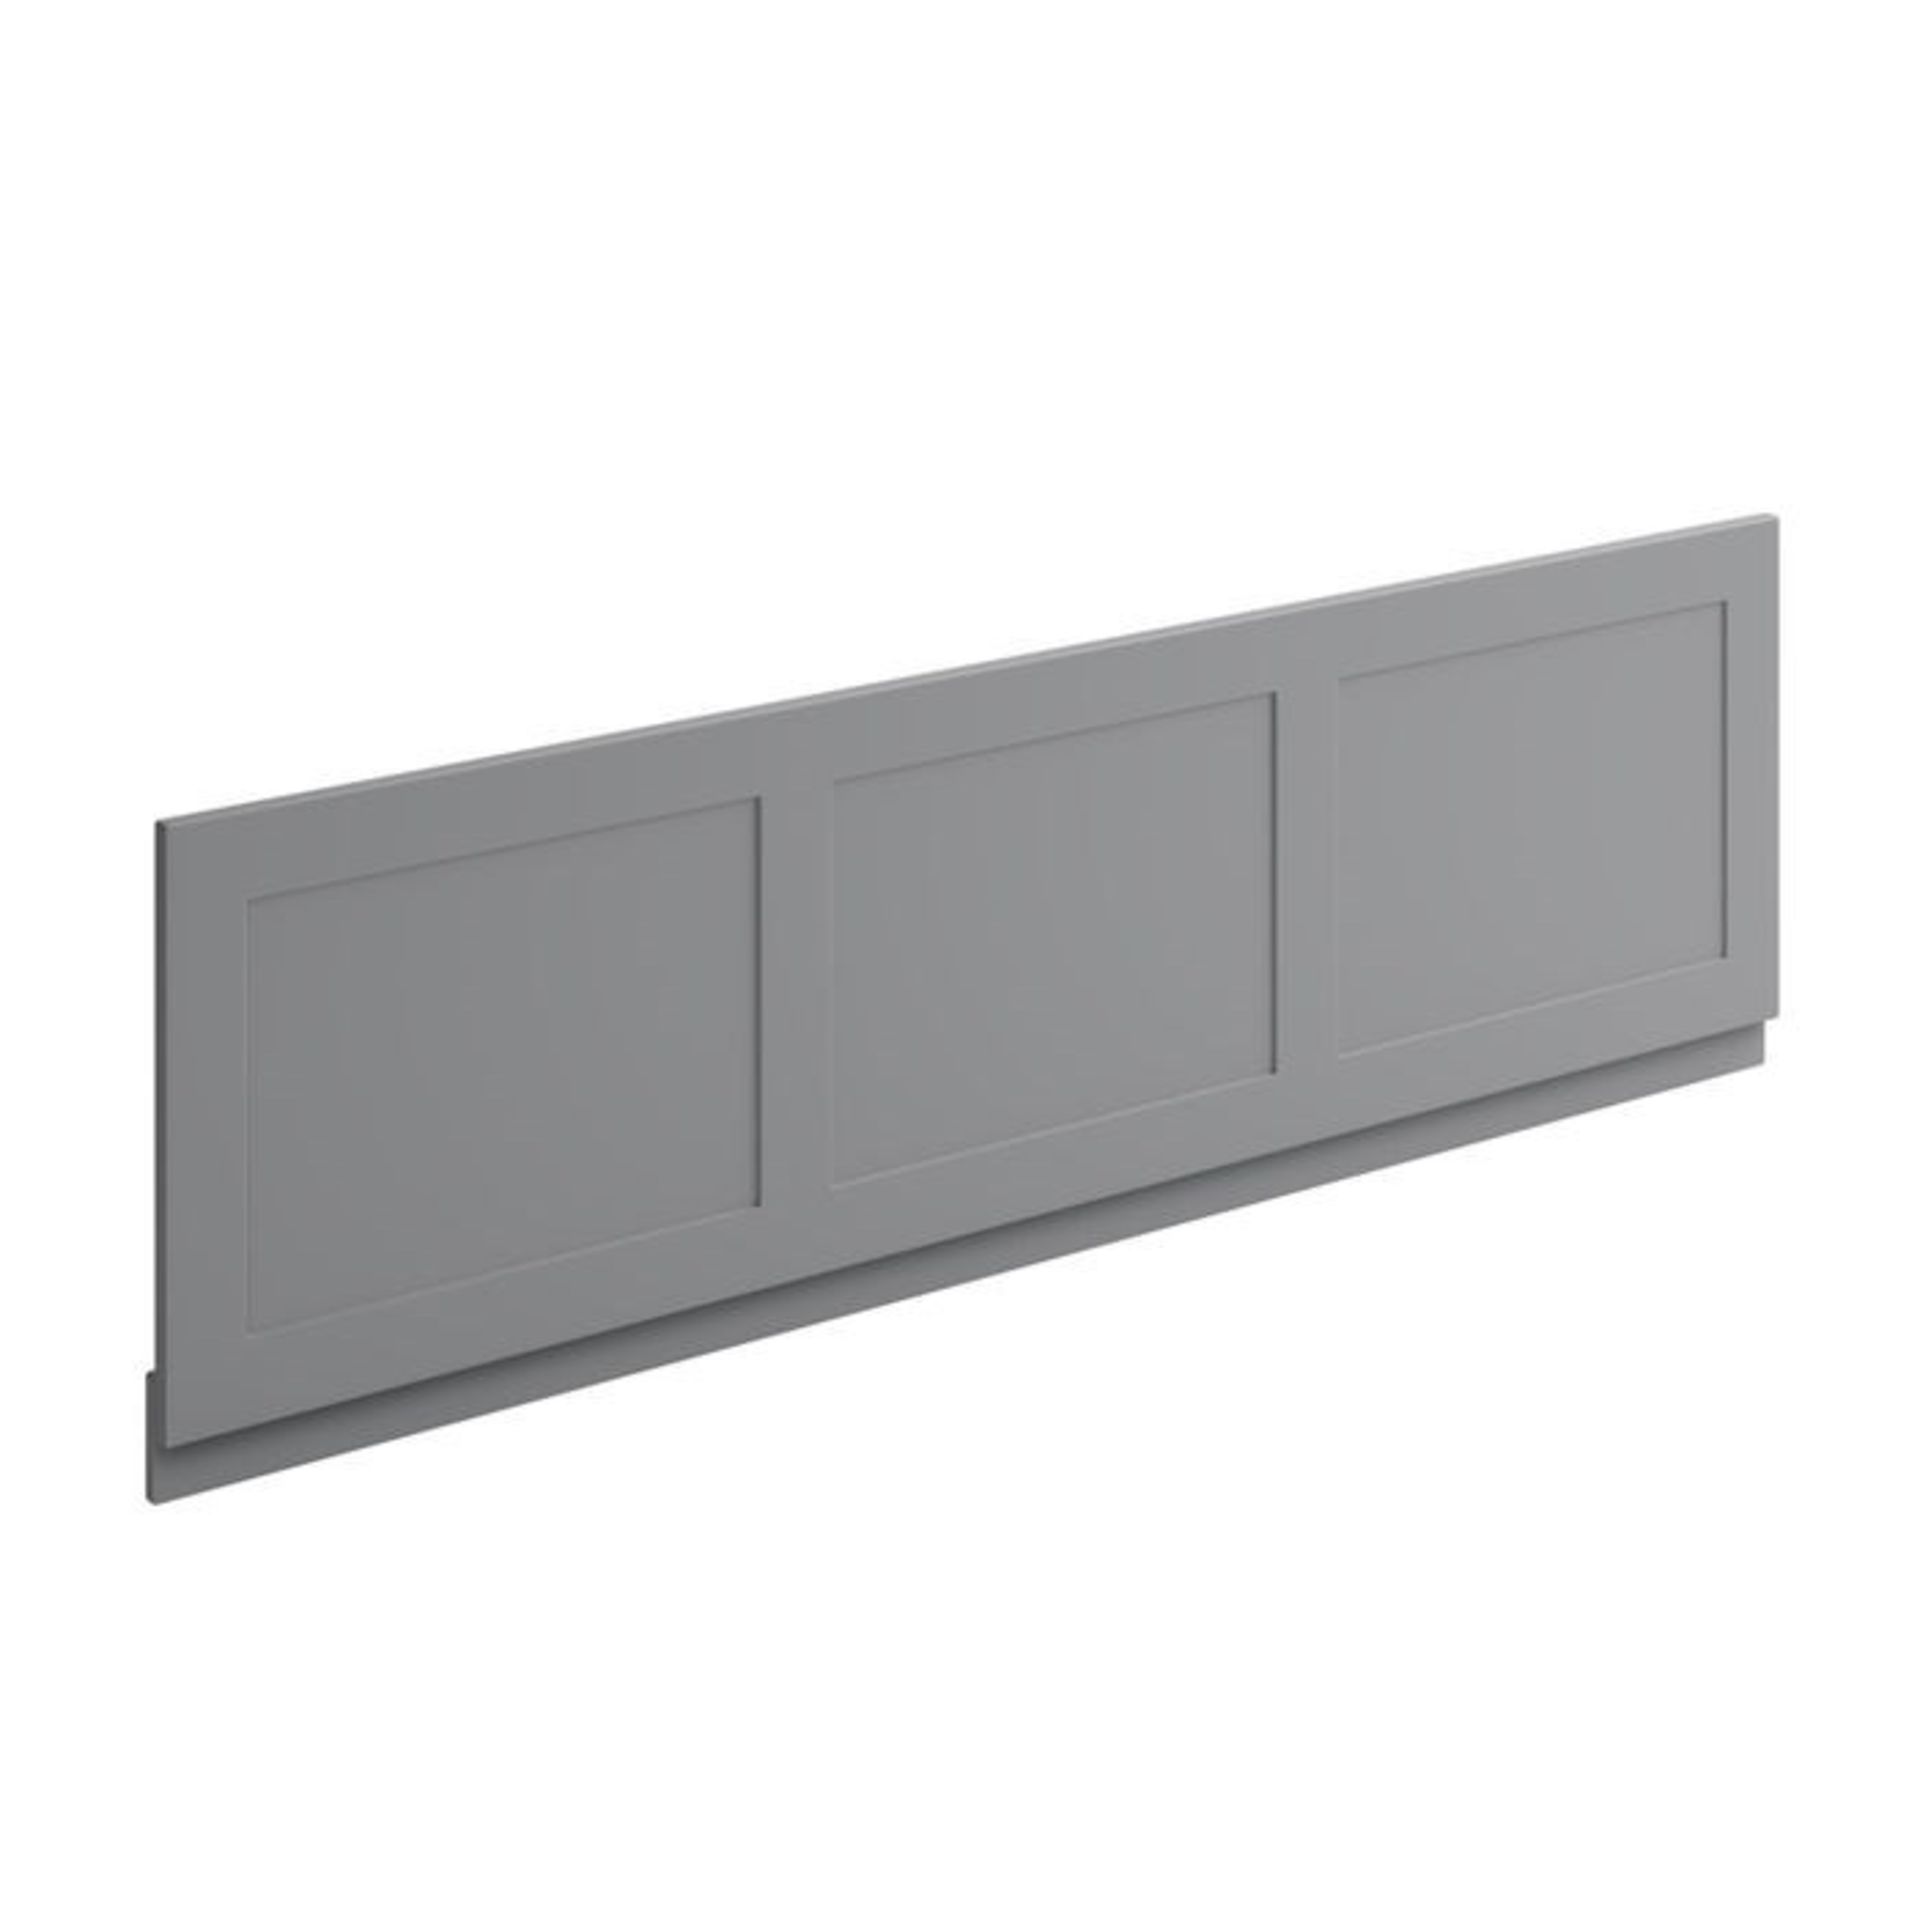 (DW66) 1800mm Melbourne Straight Bath Front Panel - Earl Grey. RRP £109.99.Traditional Earl G... - Image 2 of 2